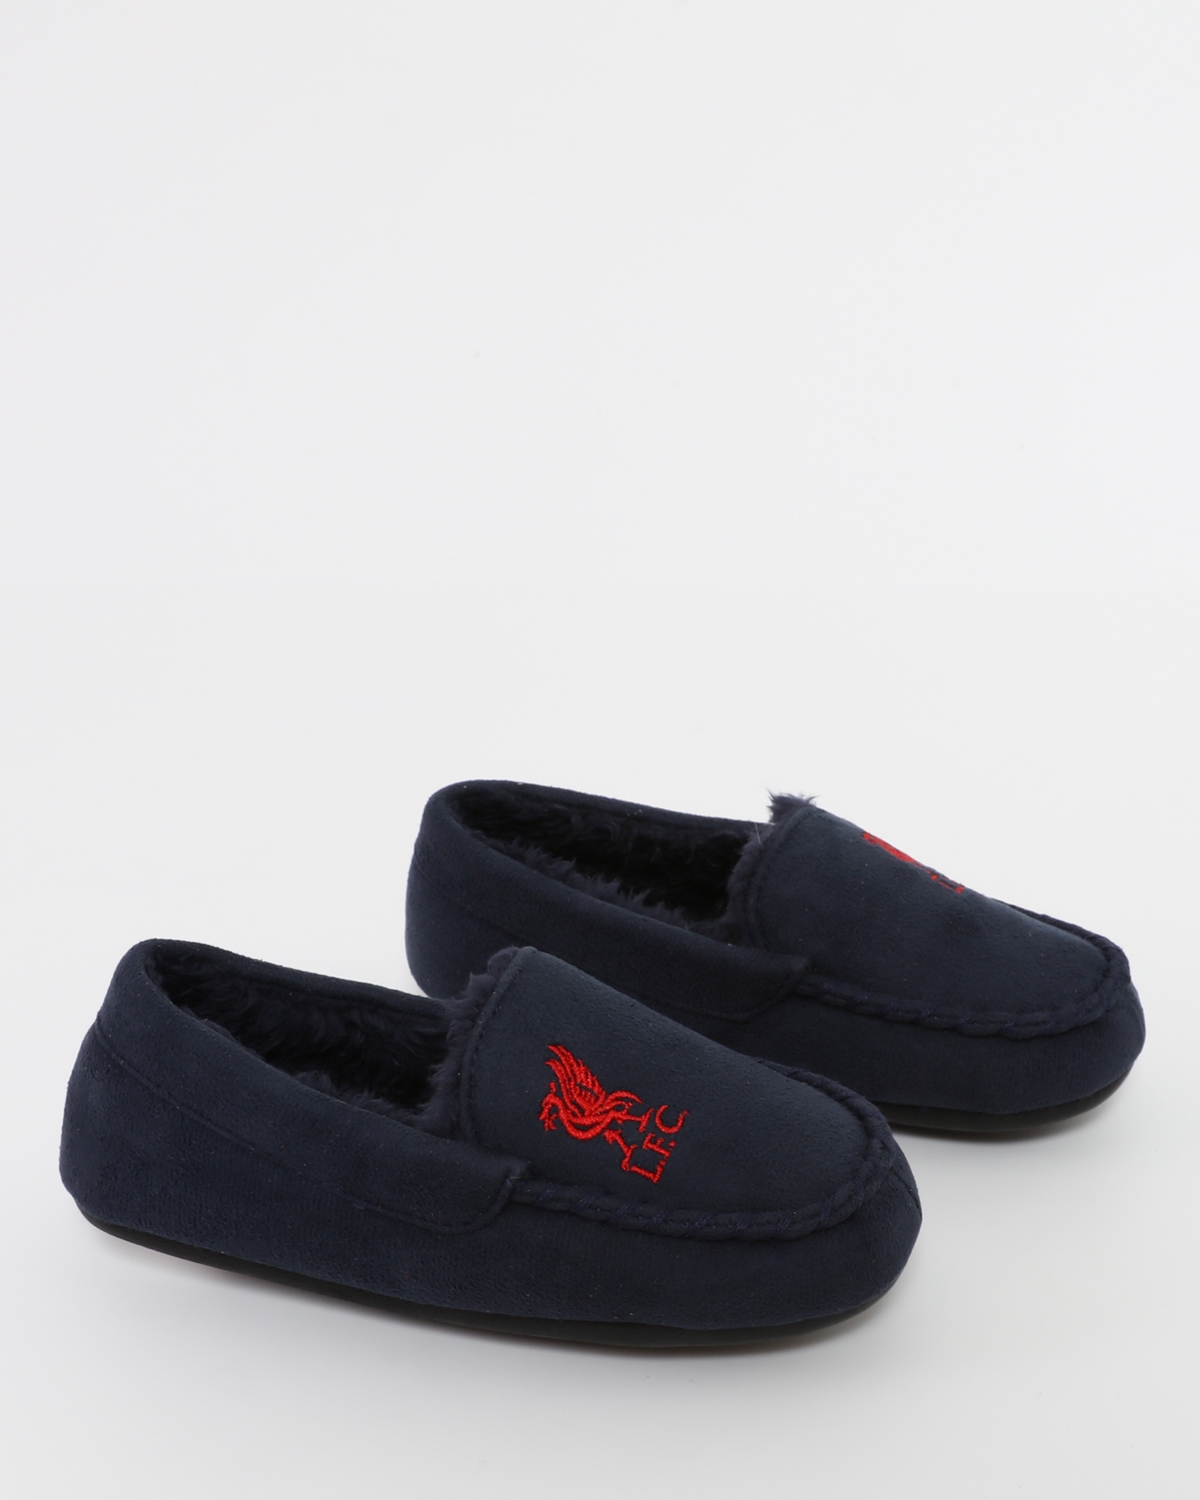 Top more than 208 liverpool fc slippers super hot